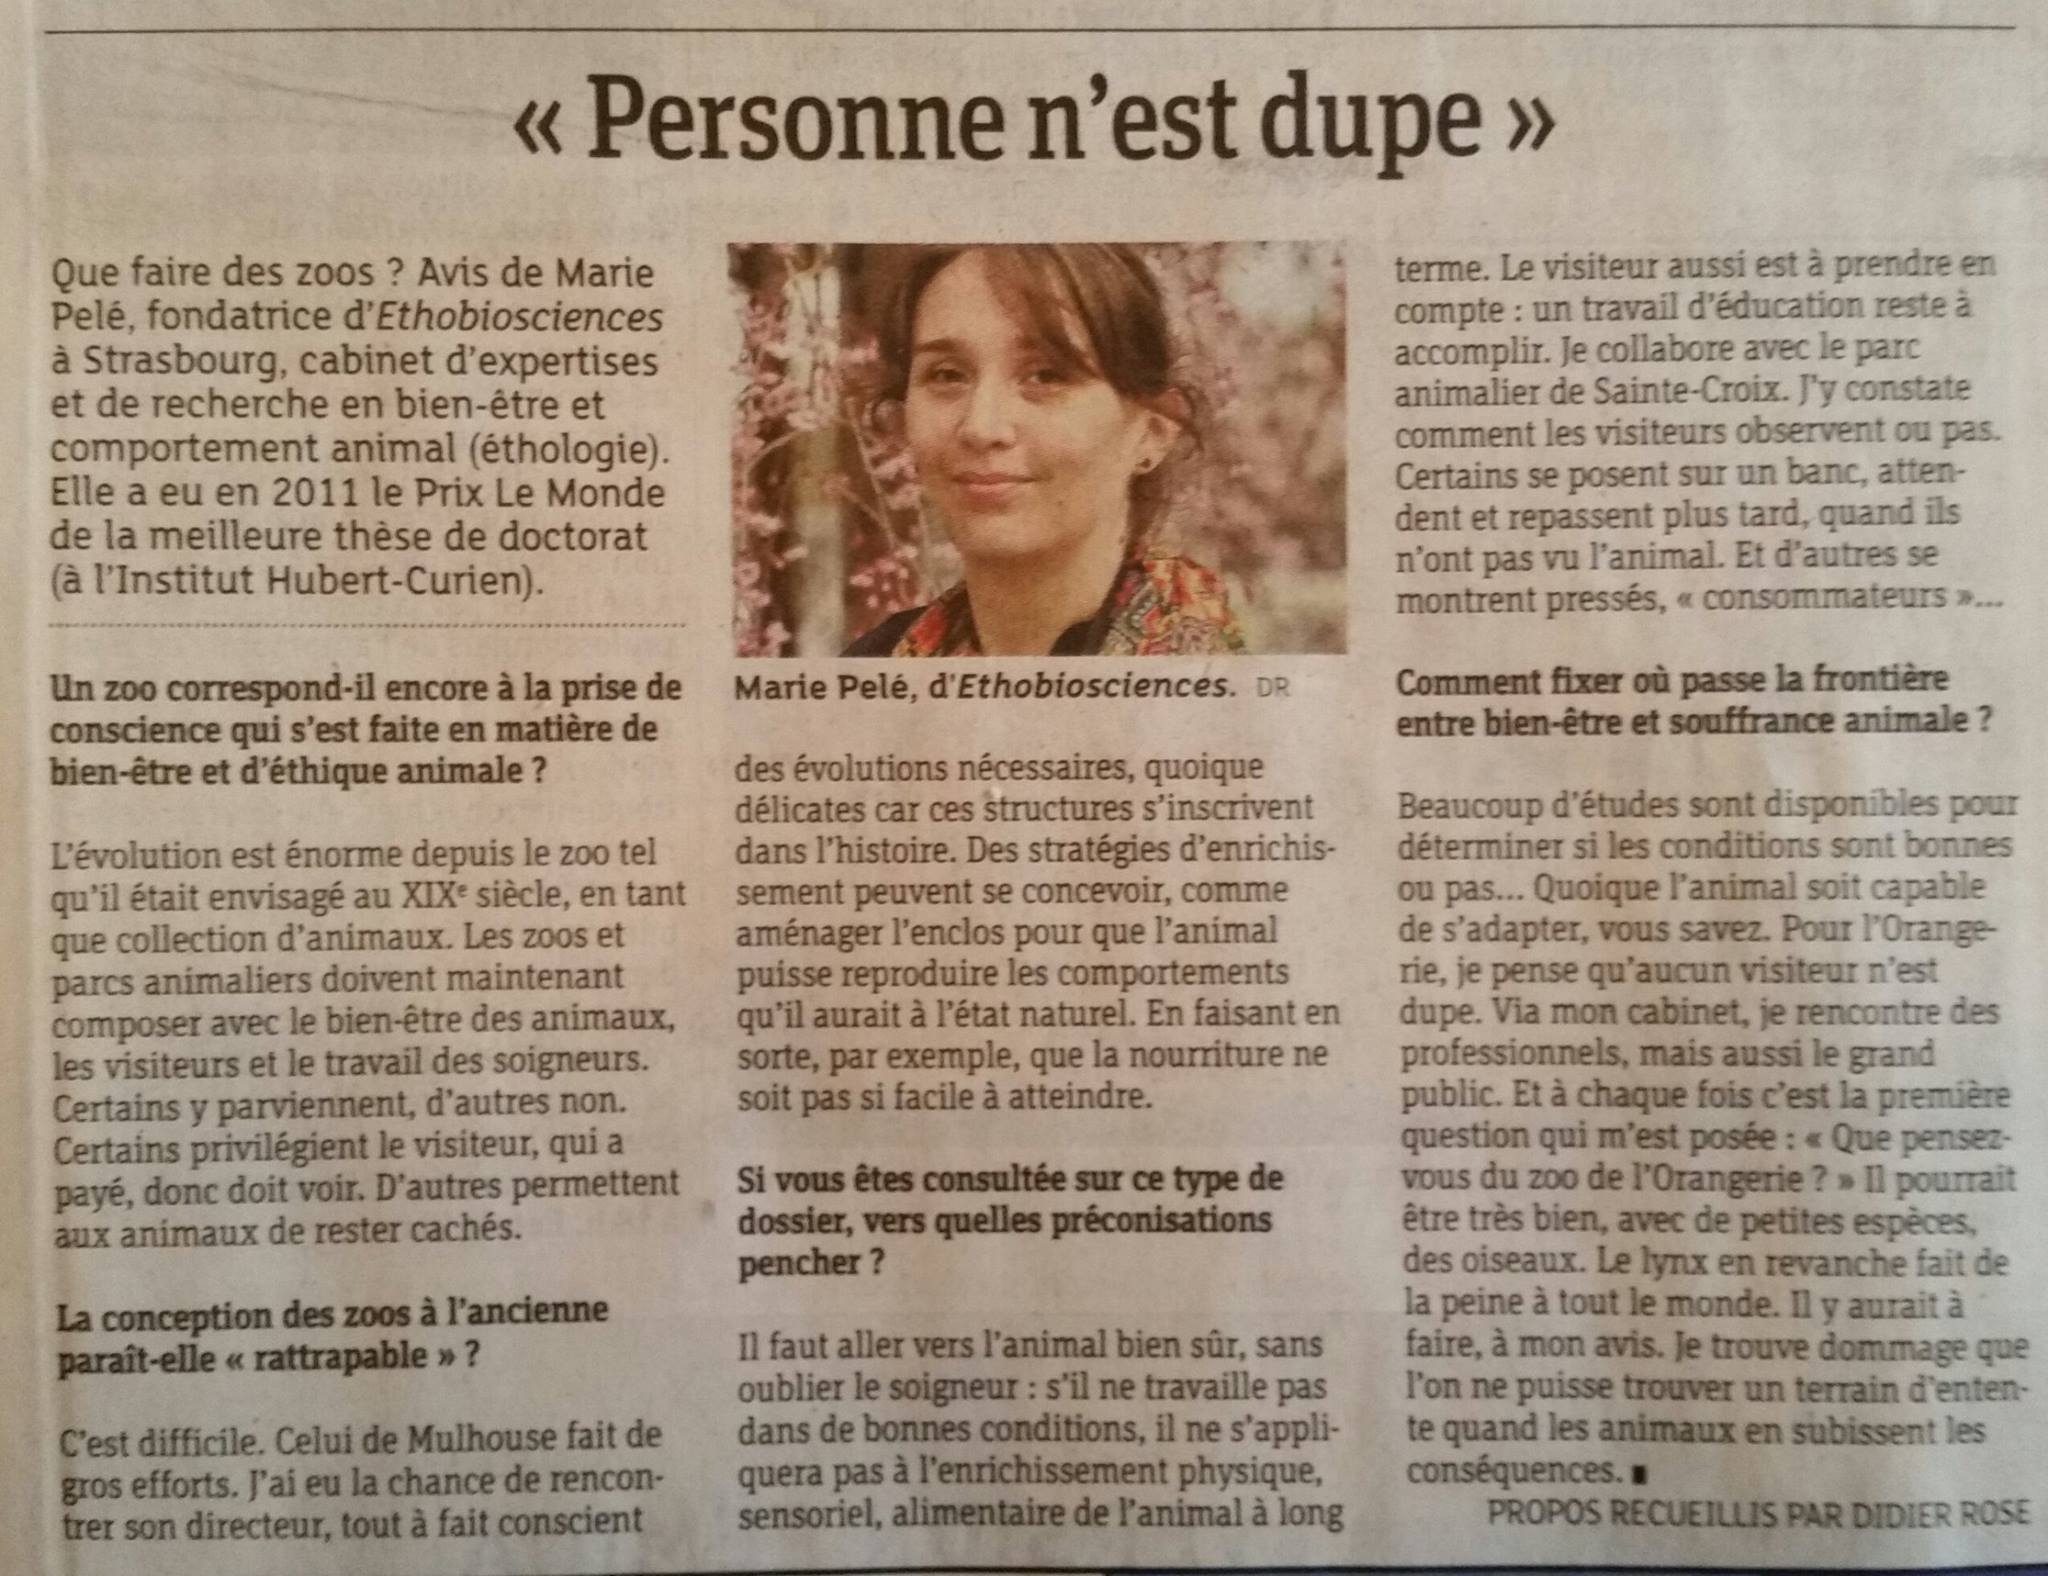 article dna 2016 personne nest dupe.jpg